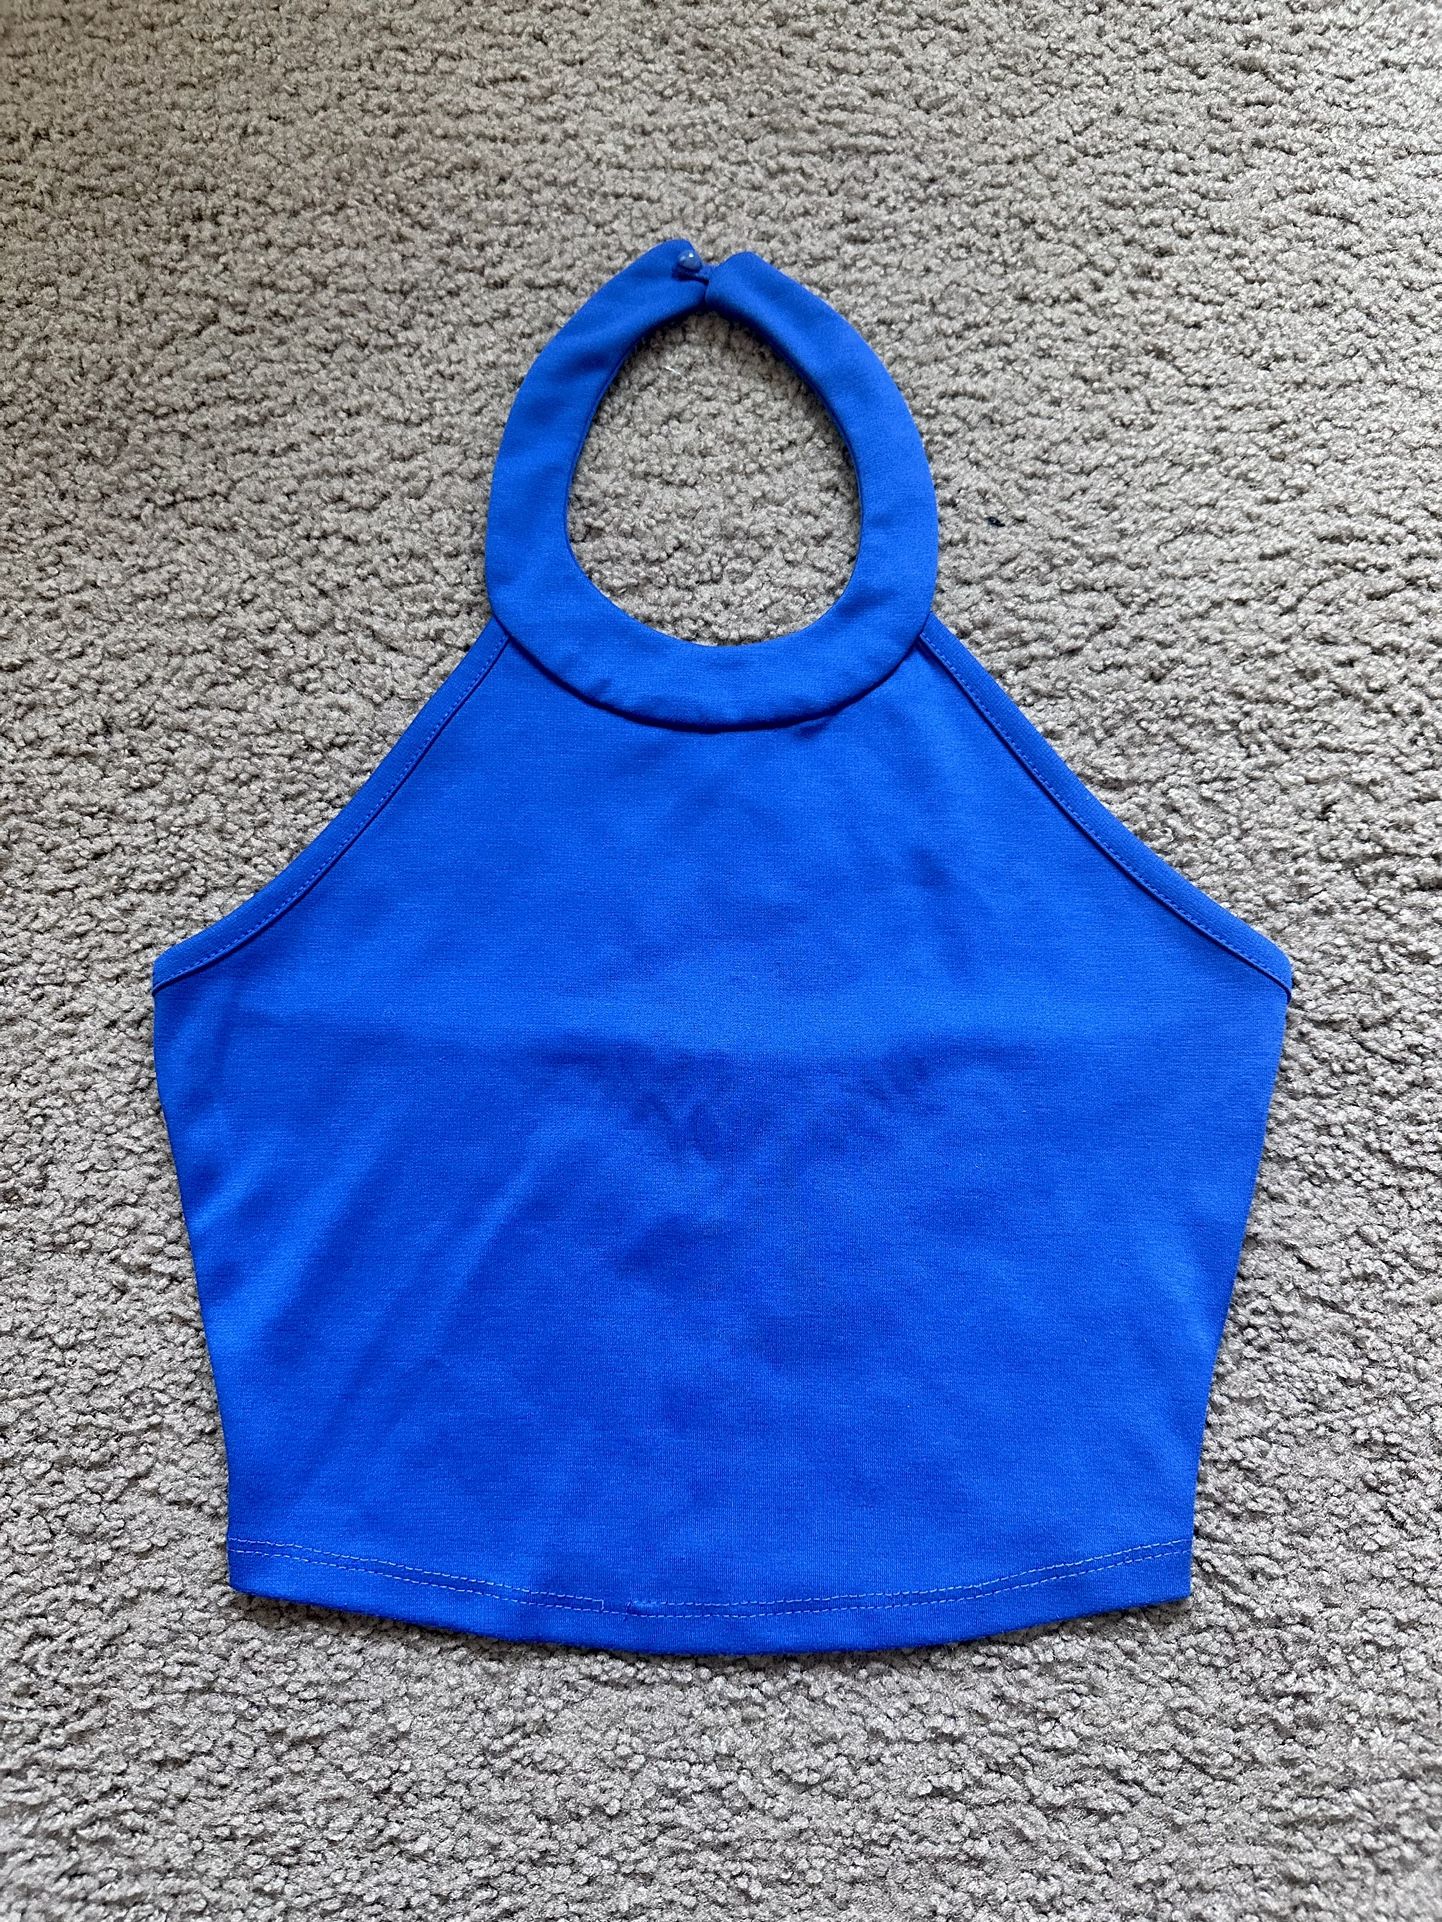 Blue Halter Crop Top (Size S) - LOCAL MEETUP ONLY